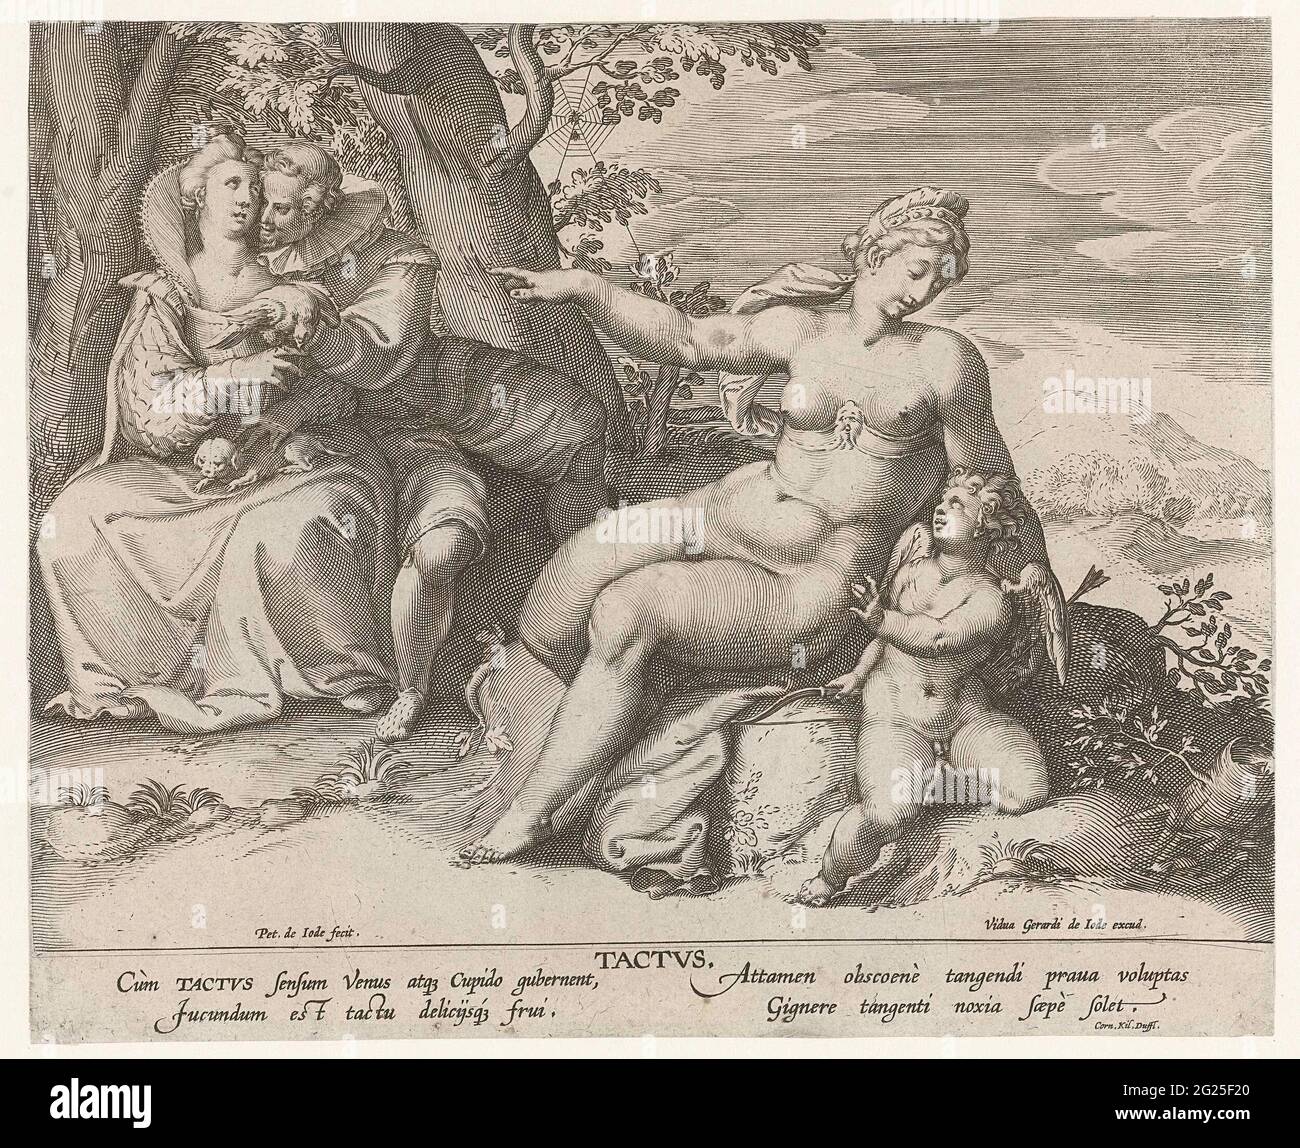 Sideline; Tactvs; The five senses. Landscape with feminine sense spirit personification, with a pigeon on her hand. A man embraces her and the dog sitting on her lap. In the foreground Venus and Amor. In the margin, in two columns, a caption in Latin. Print from a series of five with the five senses. Stock Photo